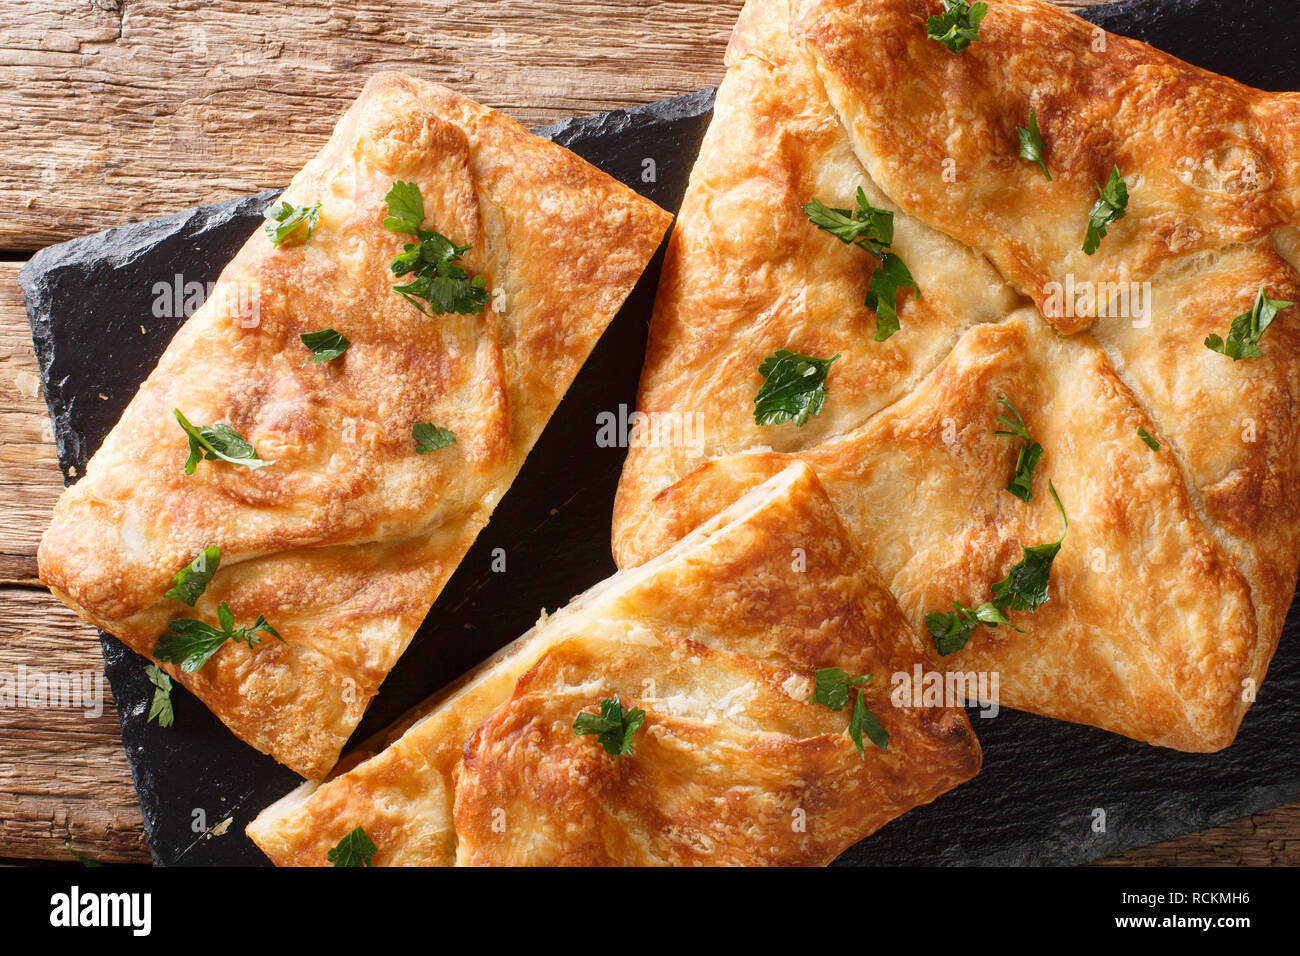 Khachapuri is a traditional Georgian dish of cheese-filled bread. The filling contains cheese sulguni, eggs and other ingredients horizontal top view  Stock Photo